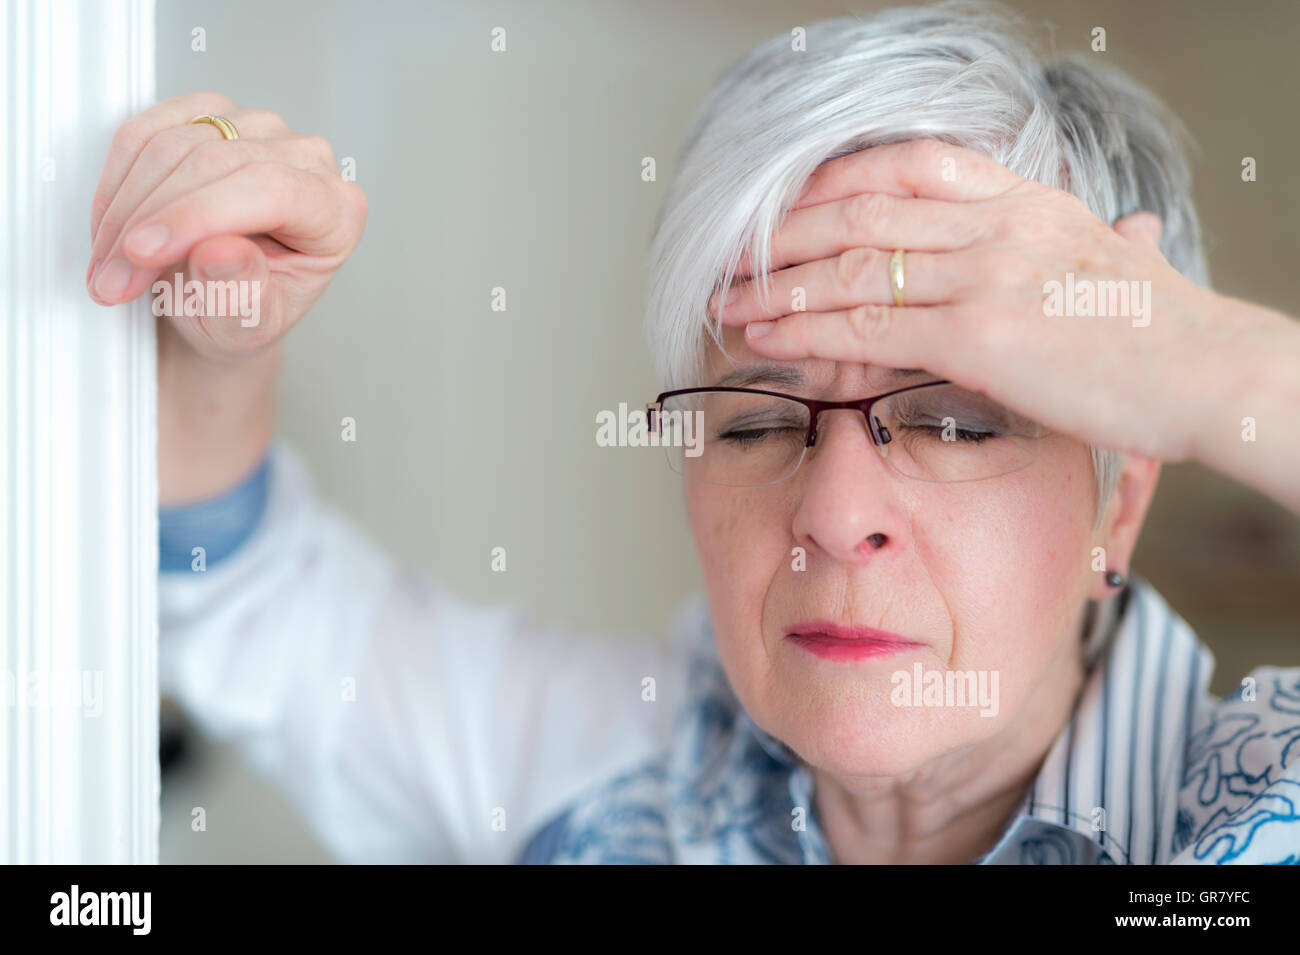 An Elderly Lady With A Headache Holds His Hand To His Forehead. Stock Photo